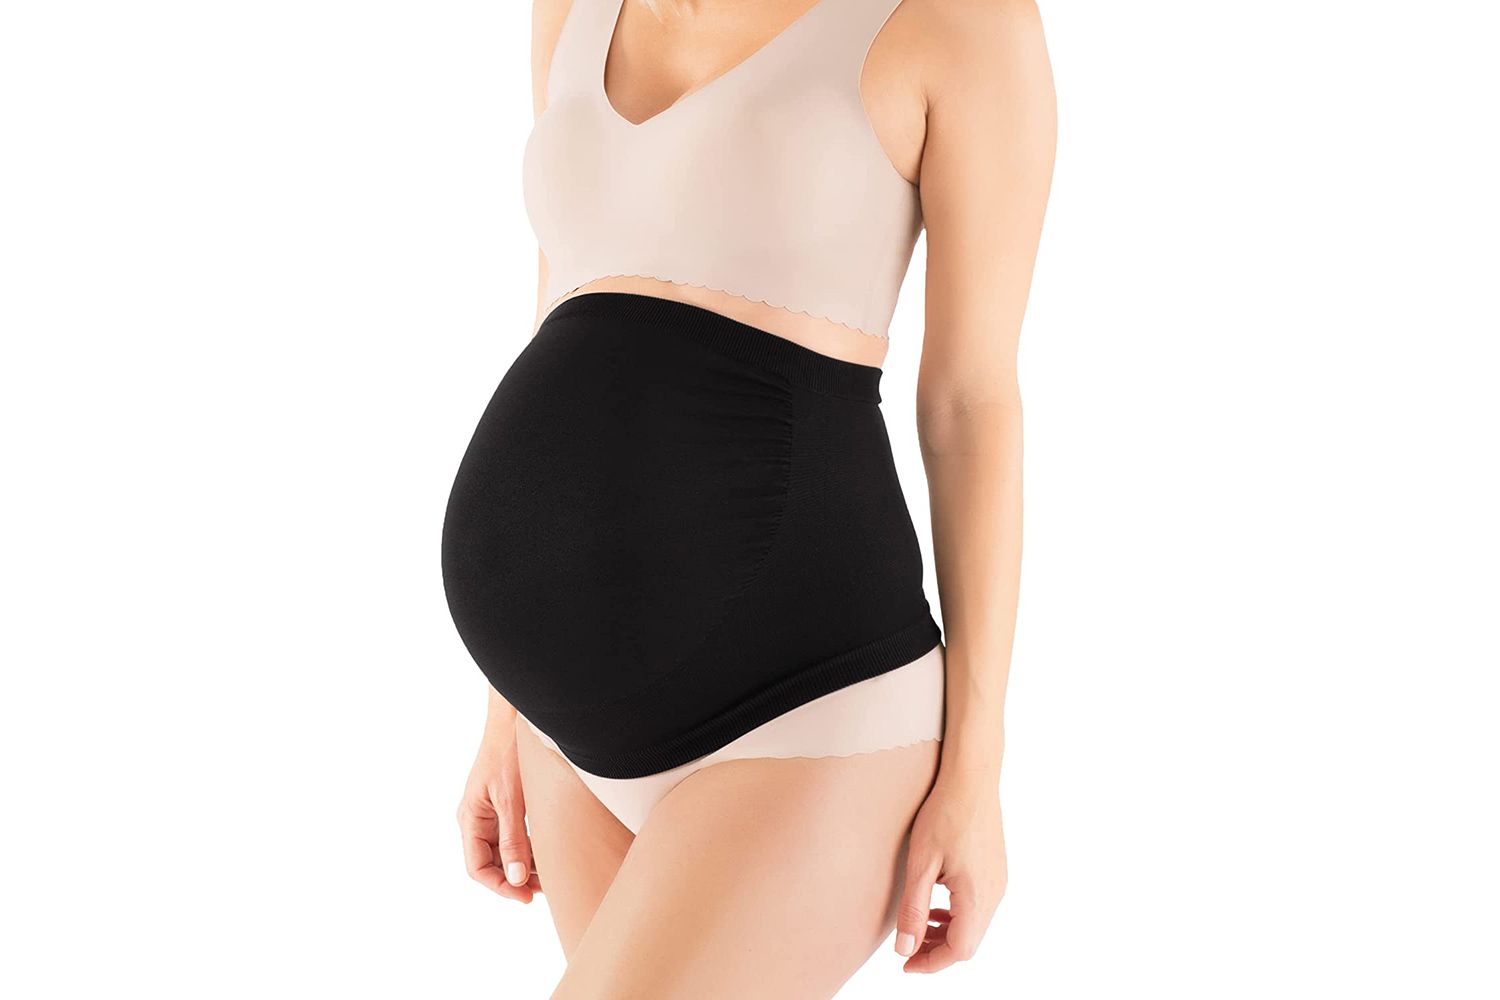 When Should You Start Wearing a Belly Band During Pregnancy